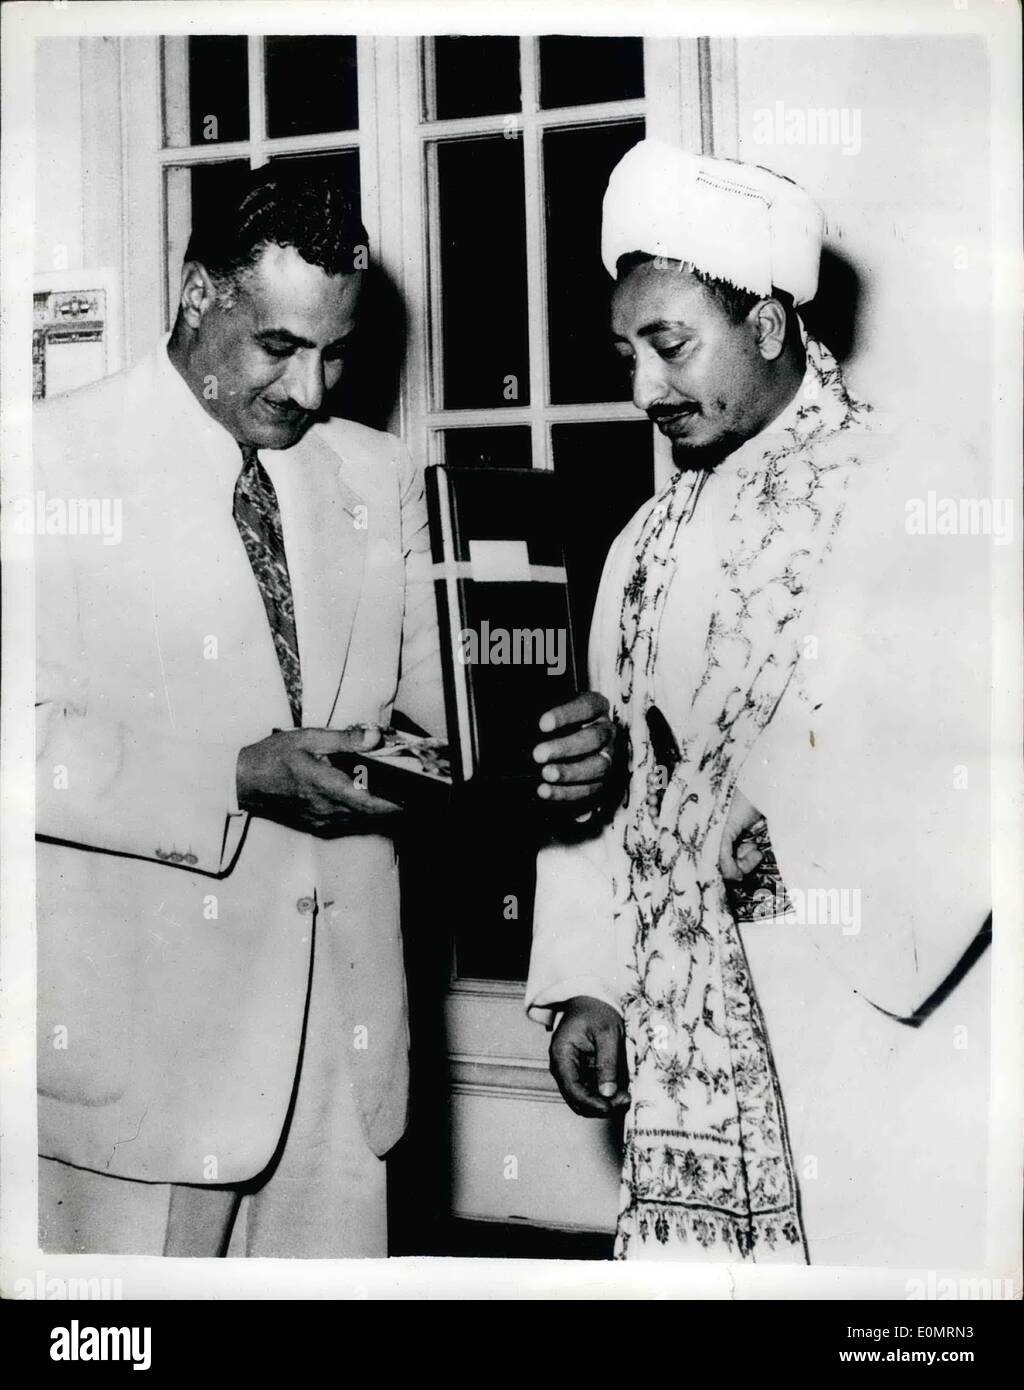 Aug. 08, 1956 - Presentation to Prince of Yemen. Nasser congratulated on Suez Canal Nationalism: Prince Seil el Islam Mohamed el Badr, Crown Prince of Yemen, recently at the head of a Yemeni delegation called on President Nasser to Ã¢â‚¬ËœCongratulate him on the Nationalization of the Suez Canal'. Pres. Nasser presented the Prince with the order of the Nile First Class. Photo shows Pres. Nasser presents the award to Prince Badr in Cairo. Stock Photo